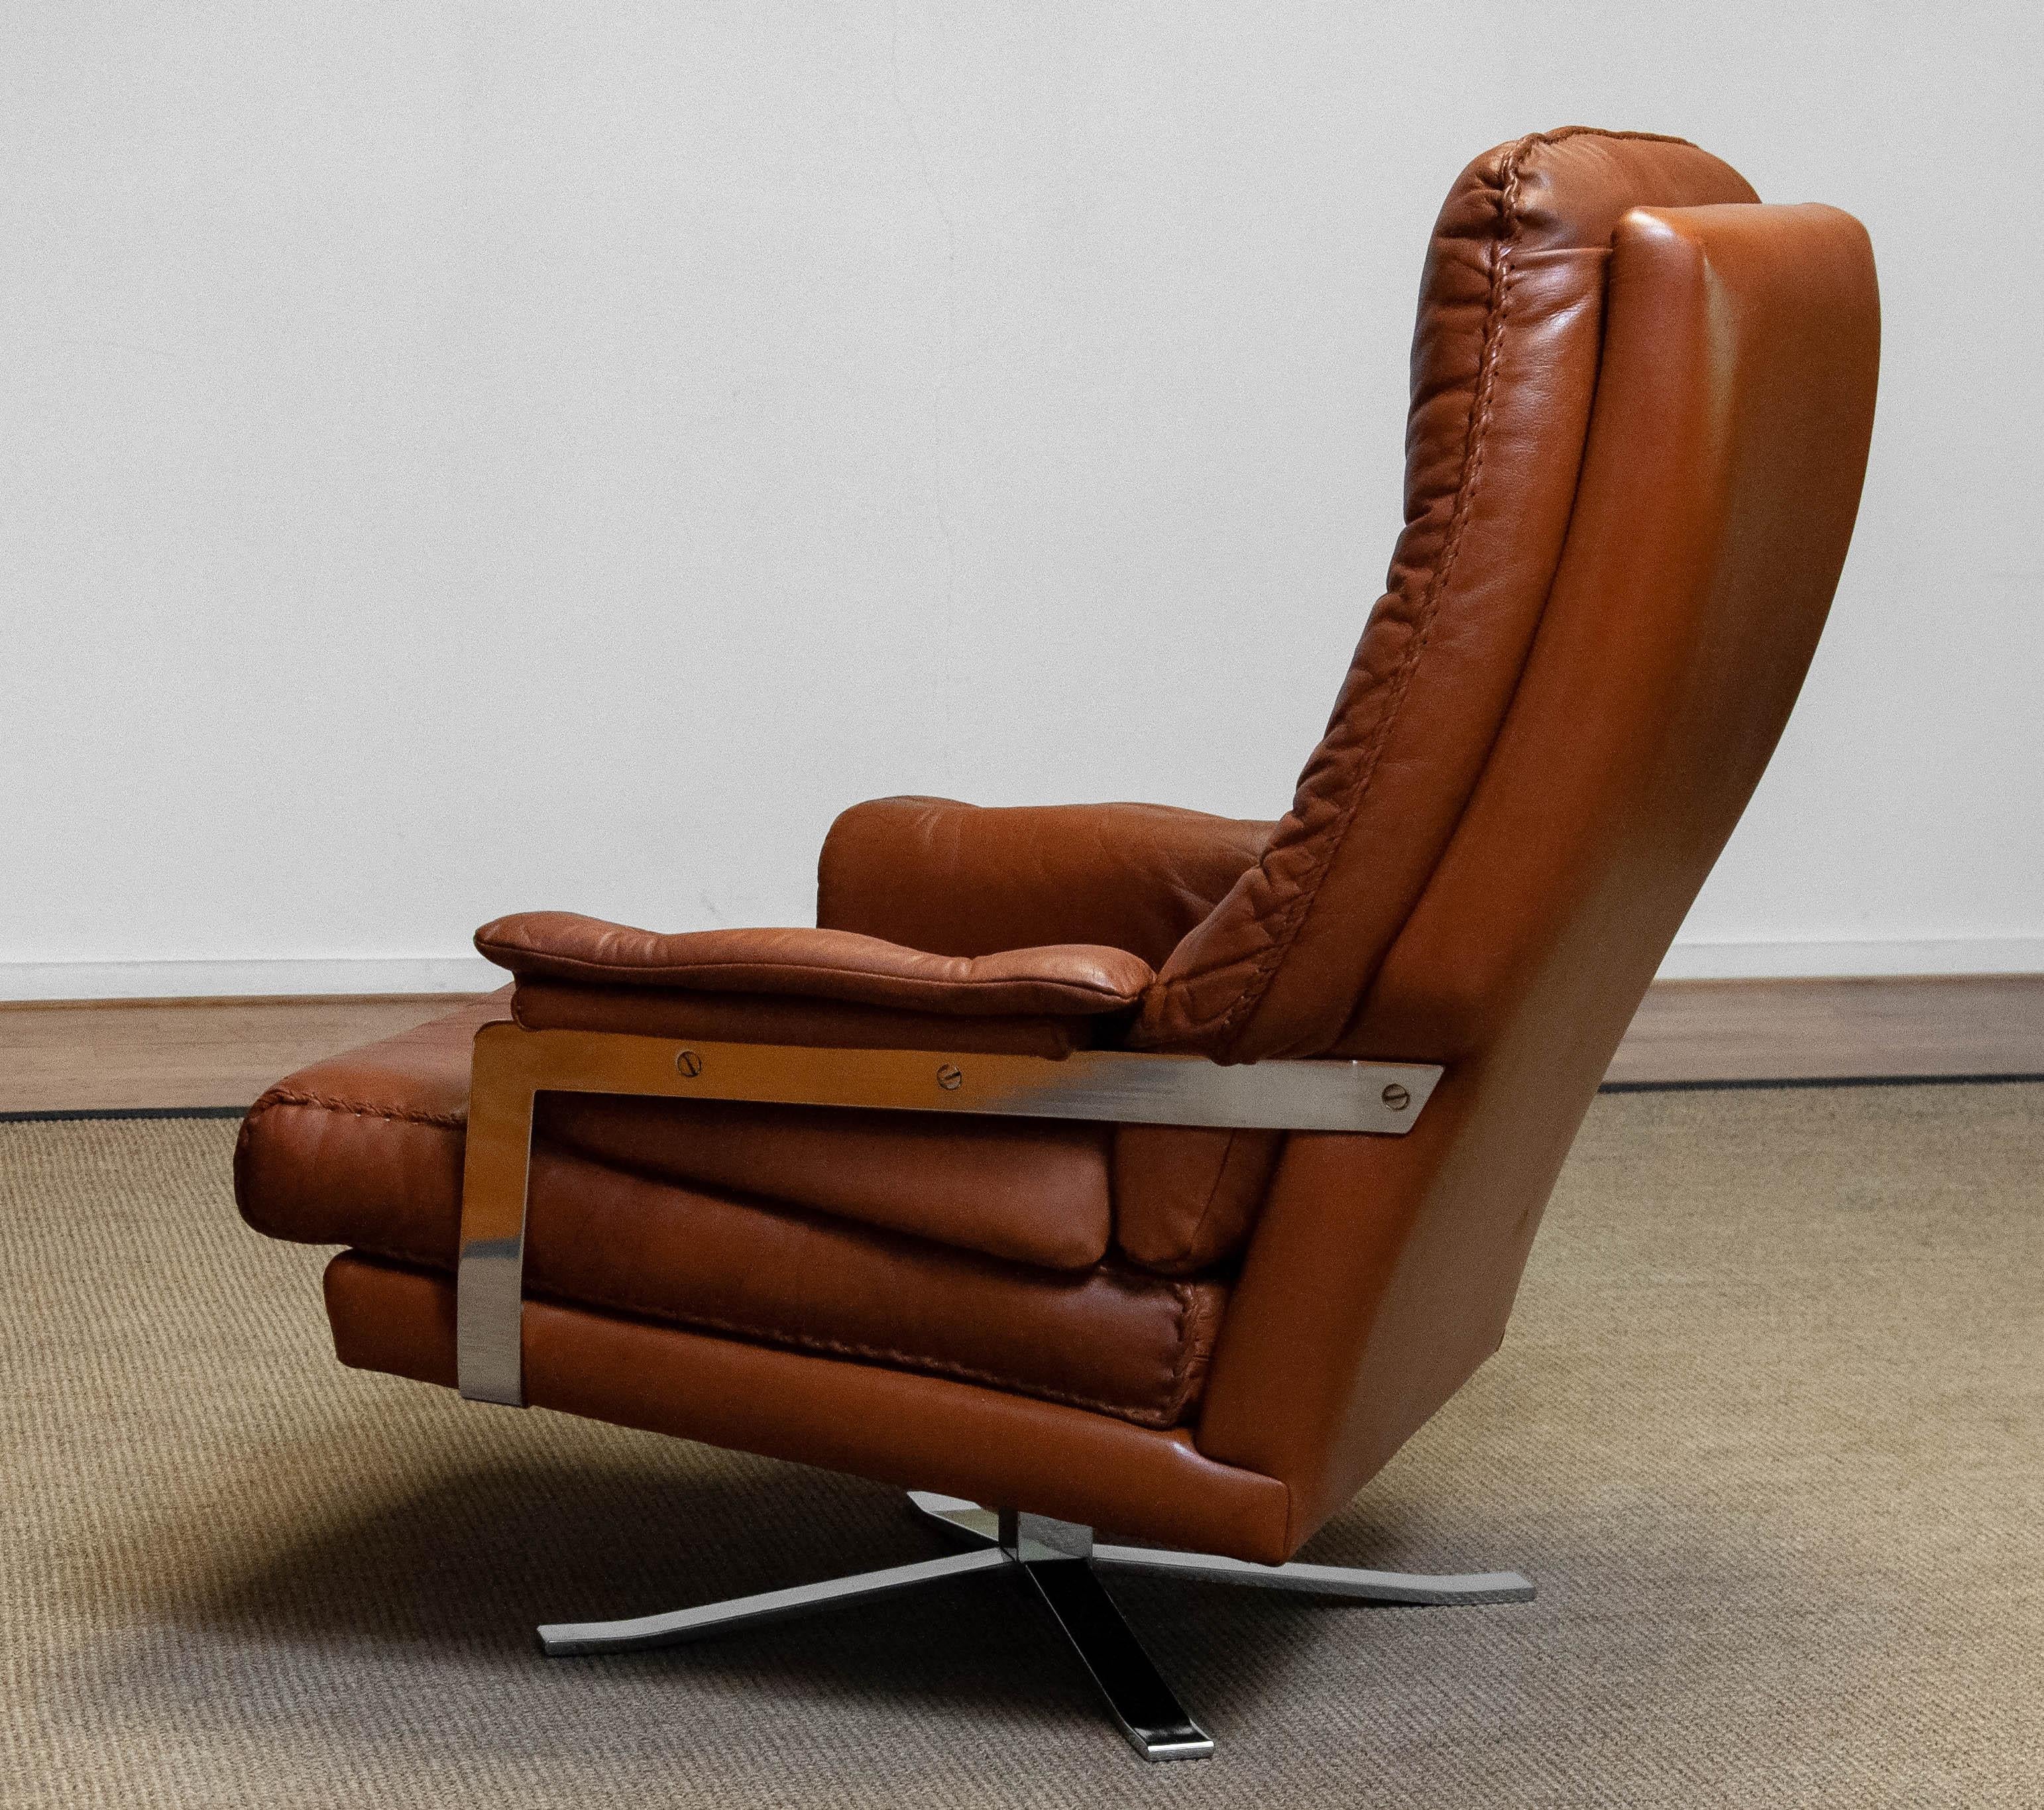 Mid-20th Century 60s Tan Brown Handstitched Leather Swivel Chair by Arne Norell for Vatne Norway For Sale